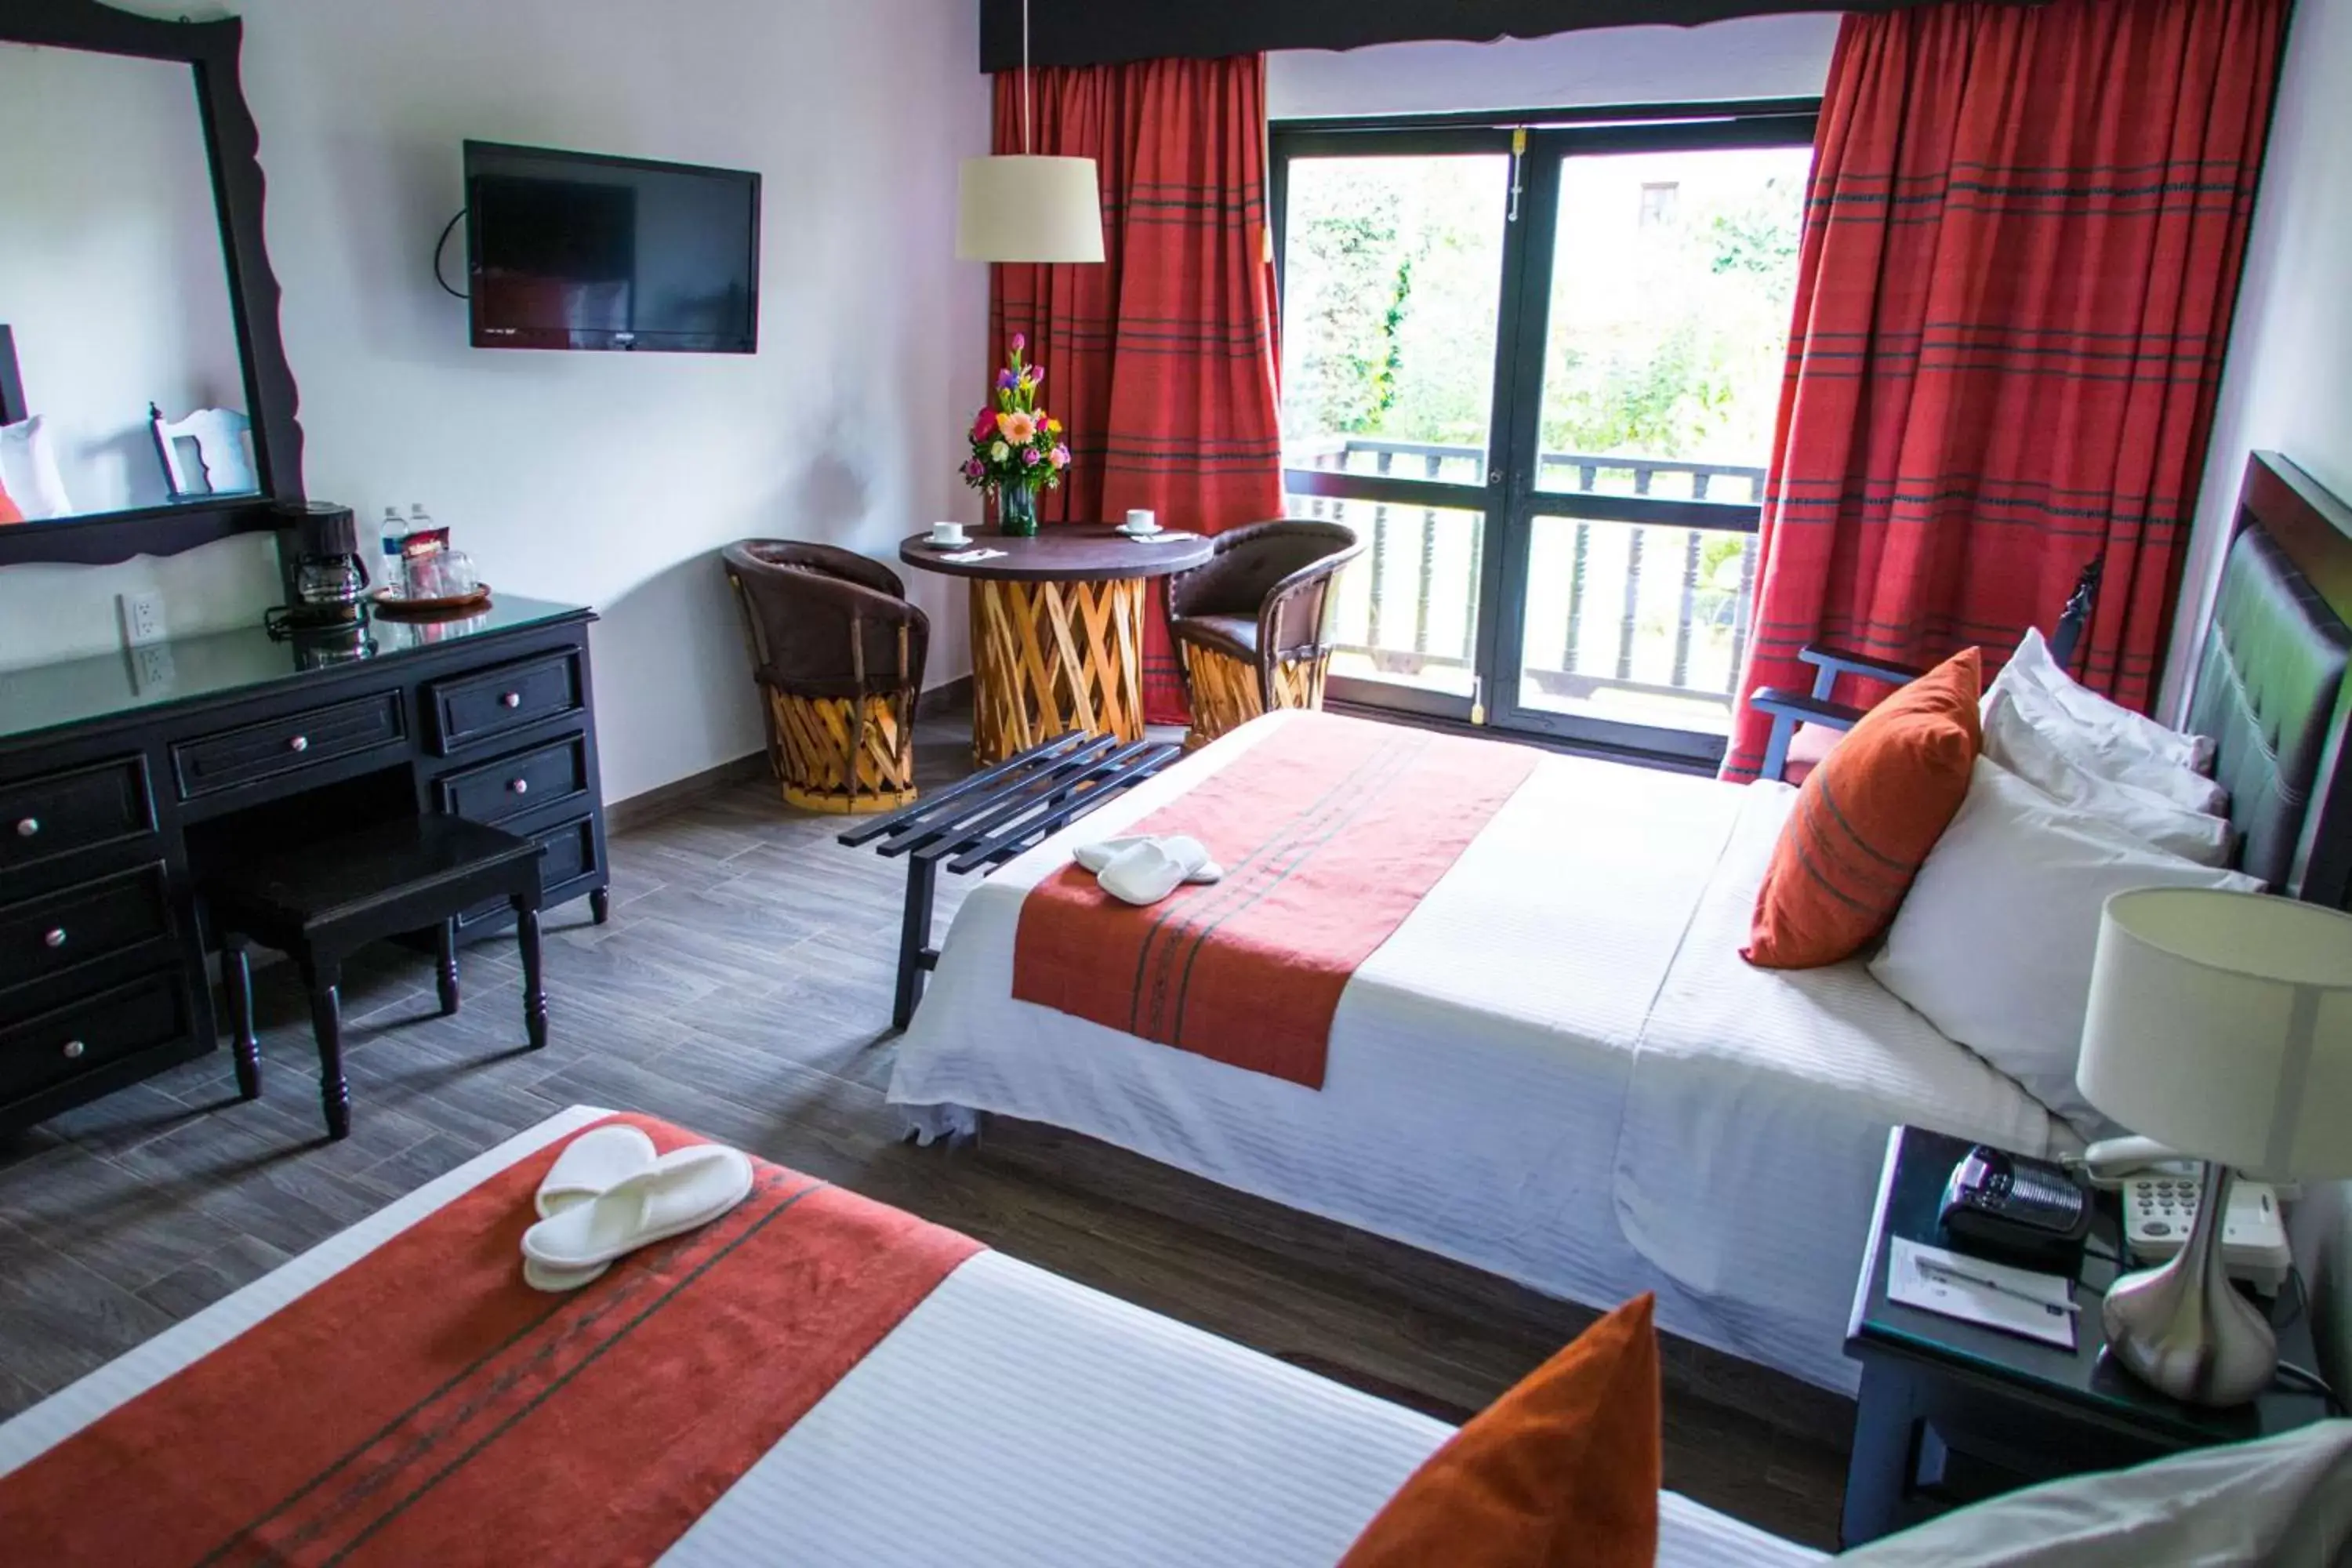 Deluxe Double Room with Two Double Beds - Non-Smoking in Best Western Plus Posada de Don Vasco